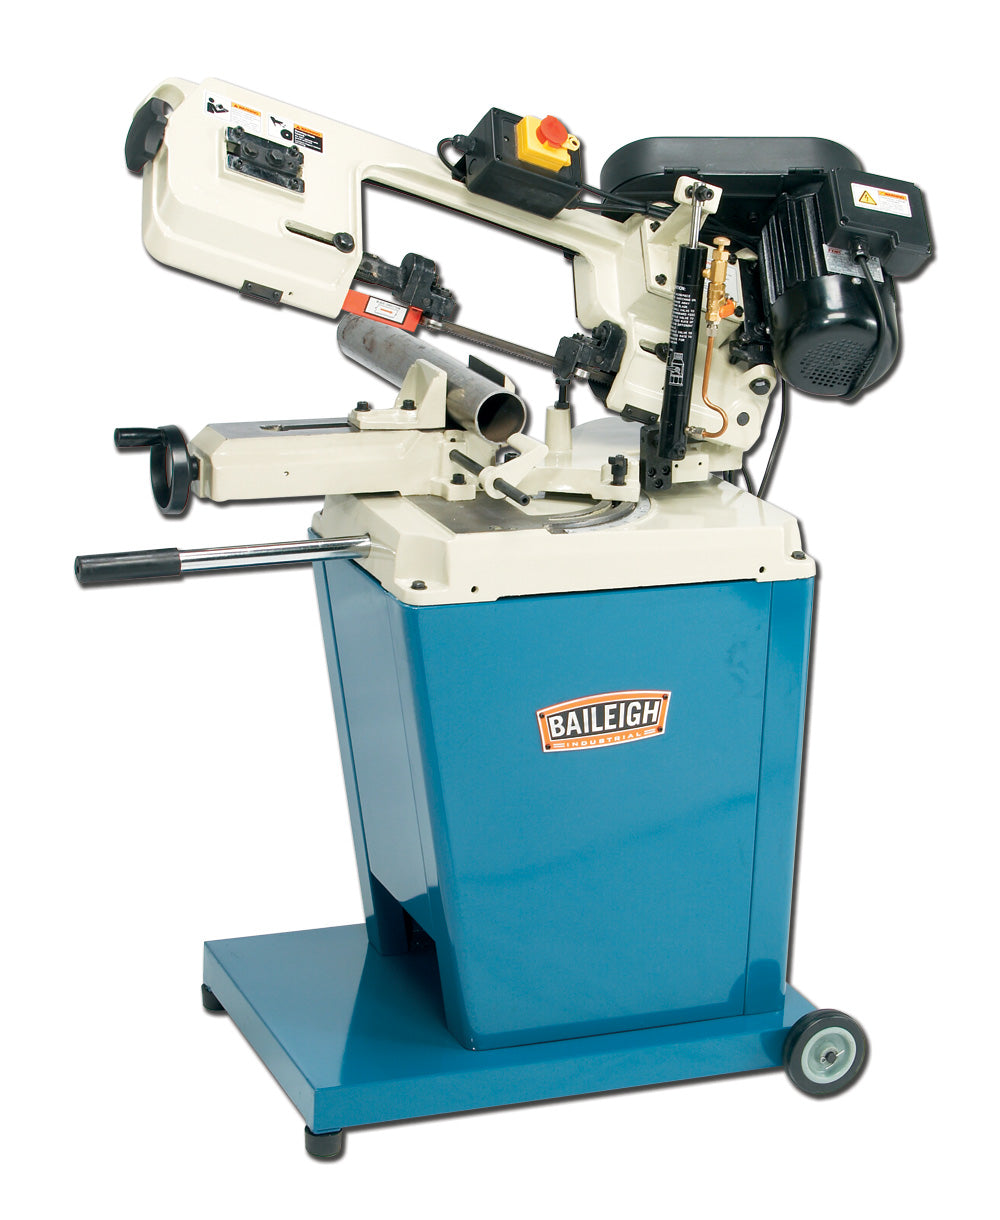 Baileigh BS-128M 110V Metal Cutting Band Saw with Vertical Cutting Option 5" Round Capacity at 90 Degrees